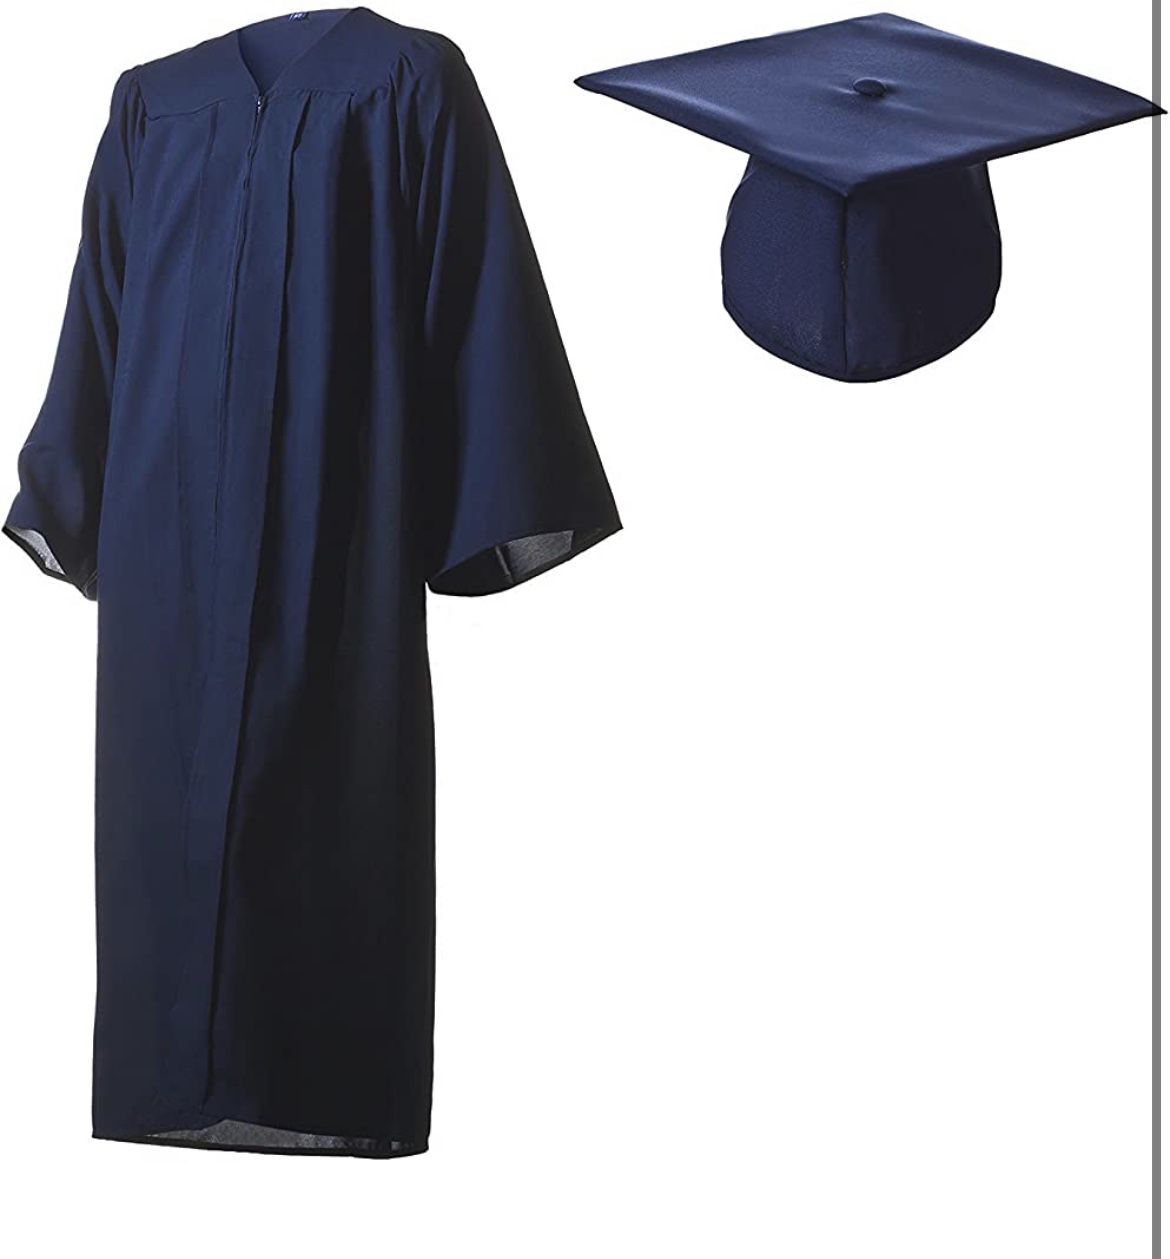 Navy Blue Cap and Gown